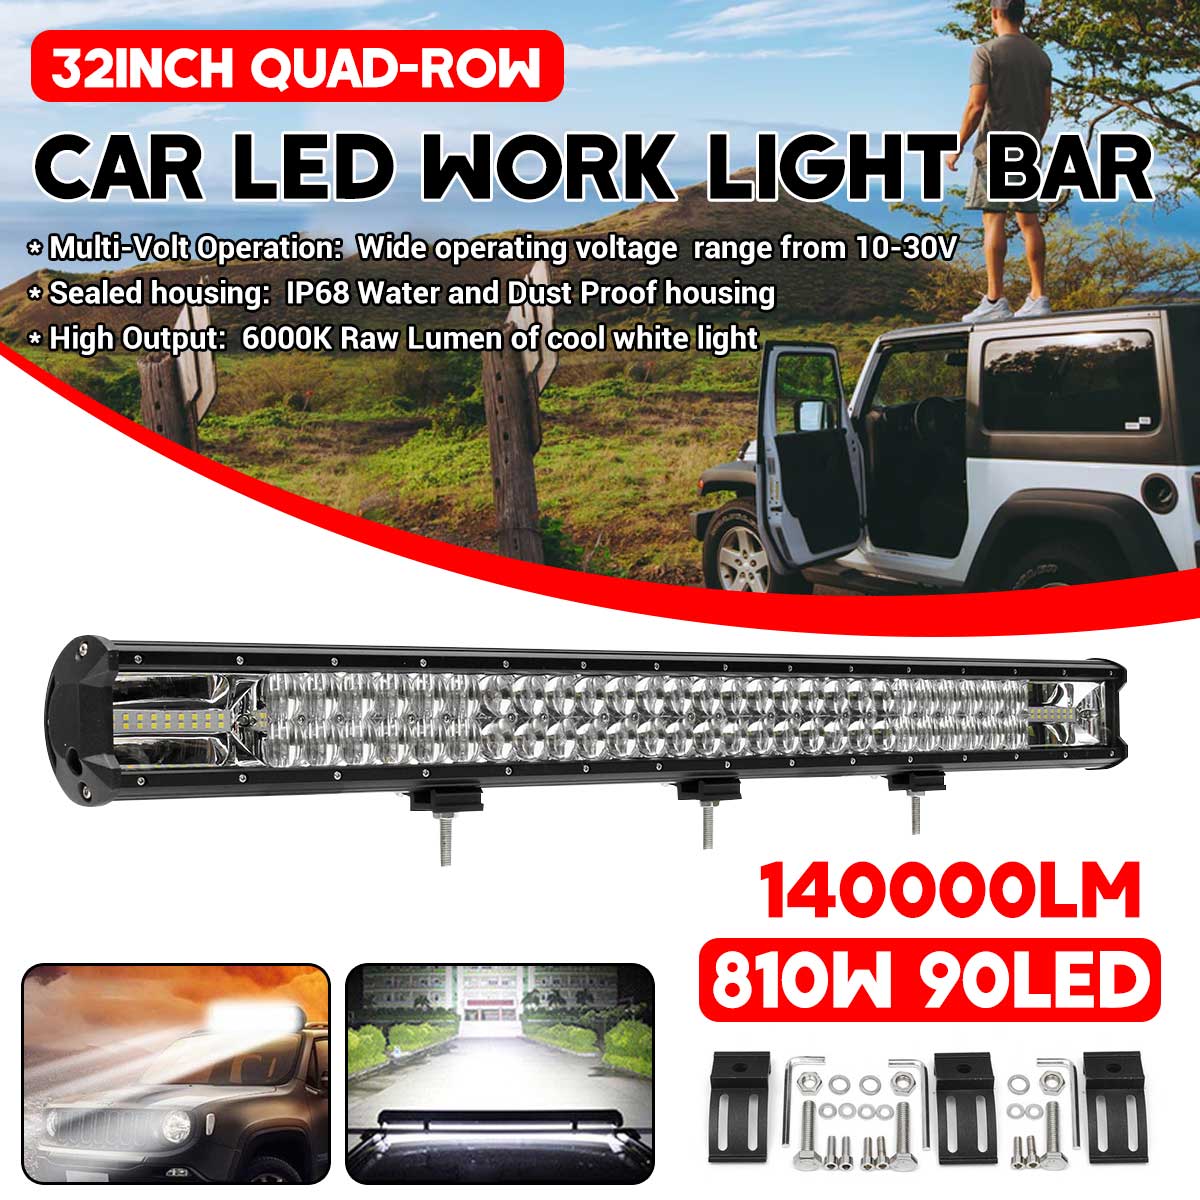 Aluminum-Alloy-Shell-PC-Lens-5D-32quot-Combo-Beam-Lower-Bracket-Working-Lamp-for-Off-road-Vehicle-Ca-1674087